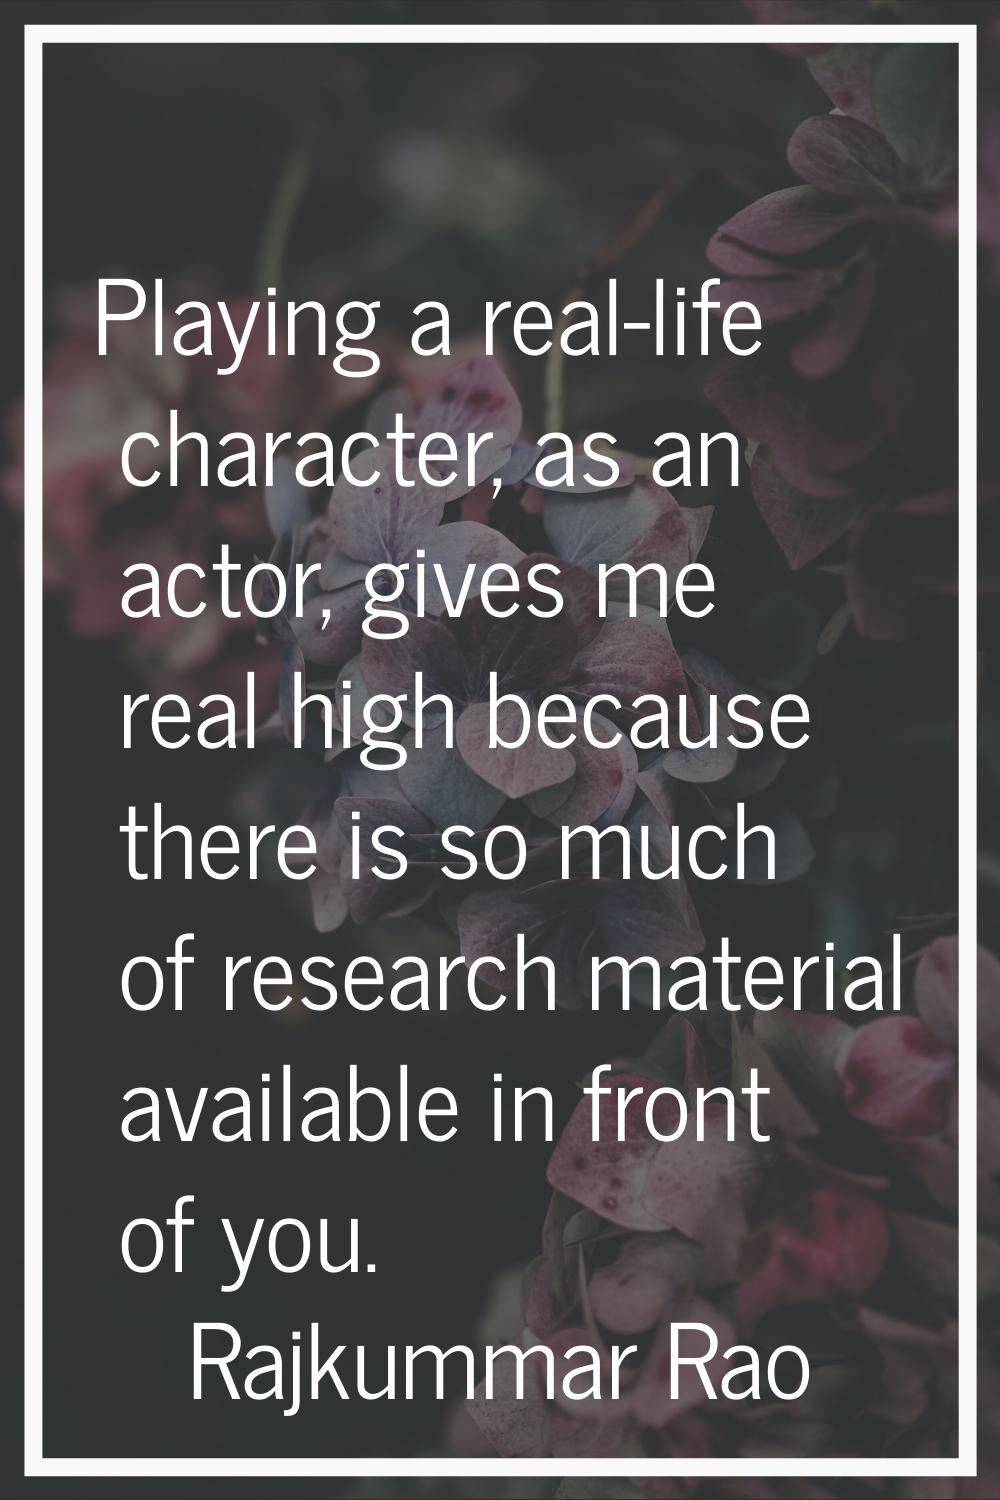 Playing a real-life character, as an actor, gives me real high because there is so much of research